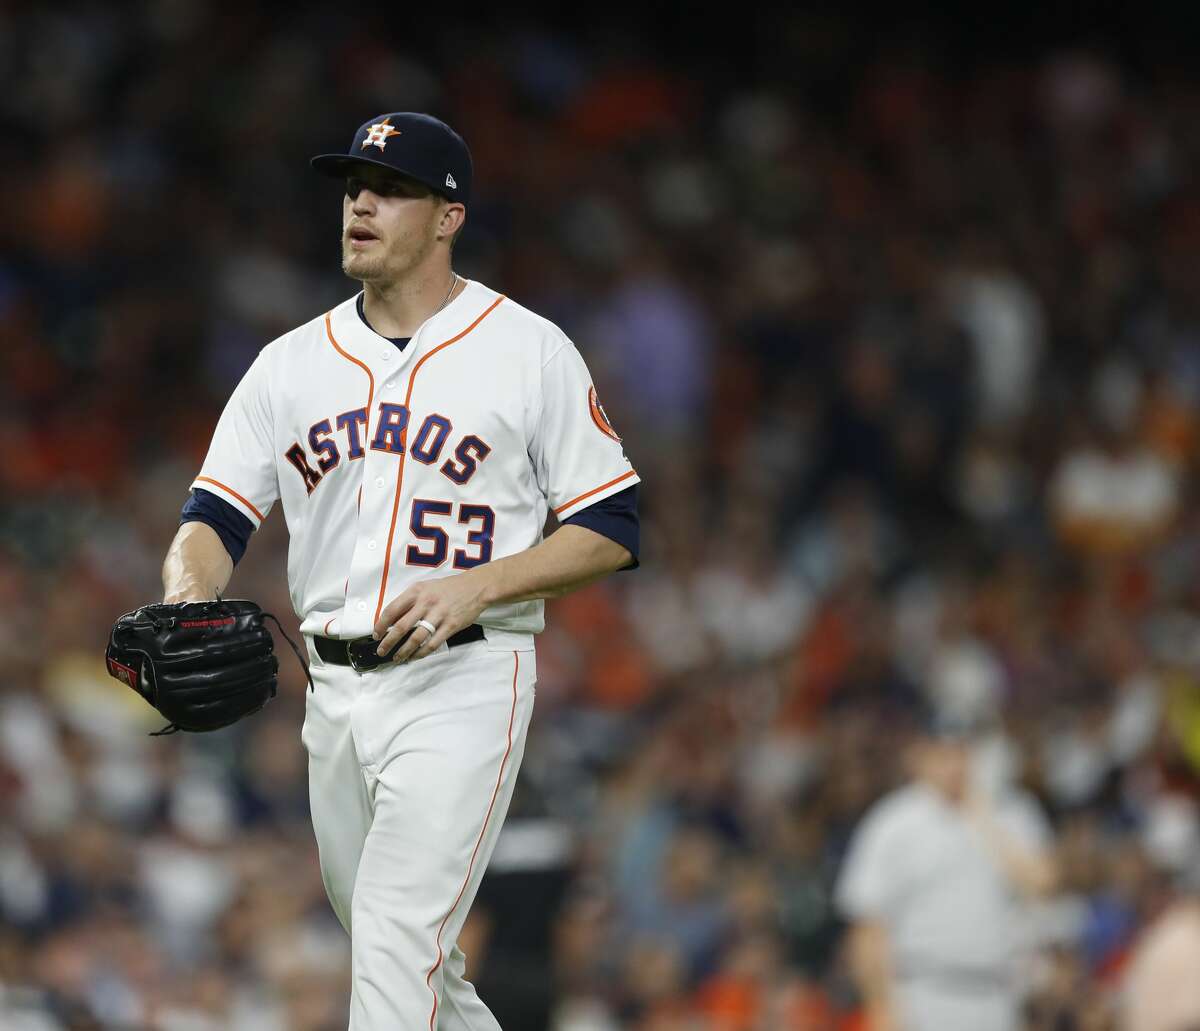 Outbursts from Ken Giles after bad performances have been seen on more than one occasion this season. The latest was followed by his demotion to Class AAA Fresno.